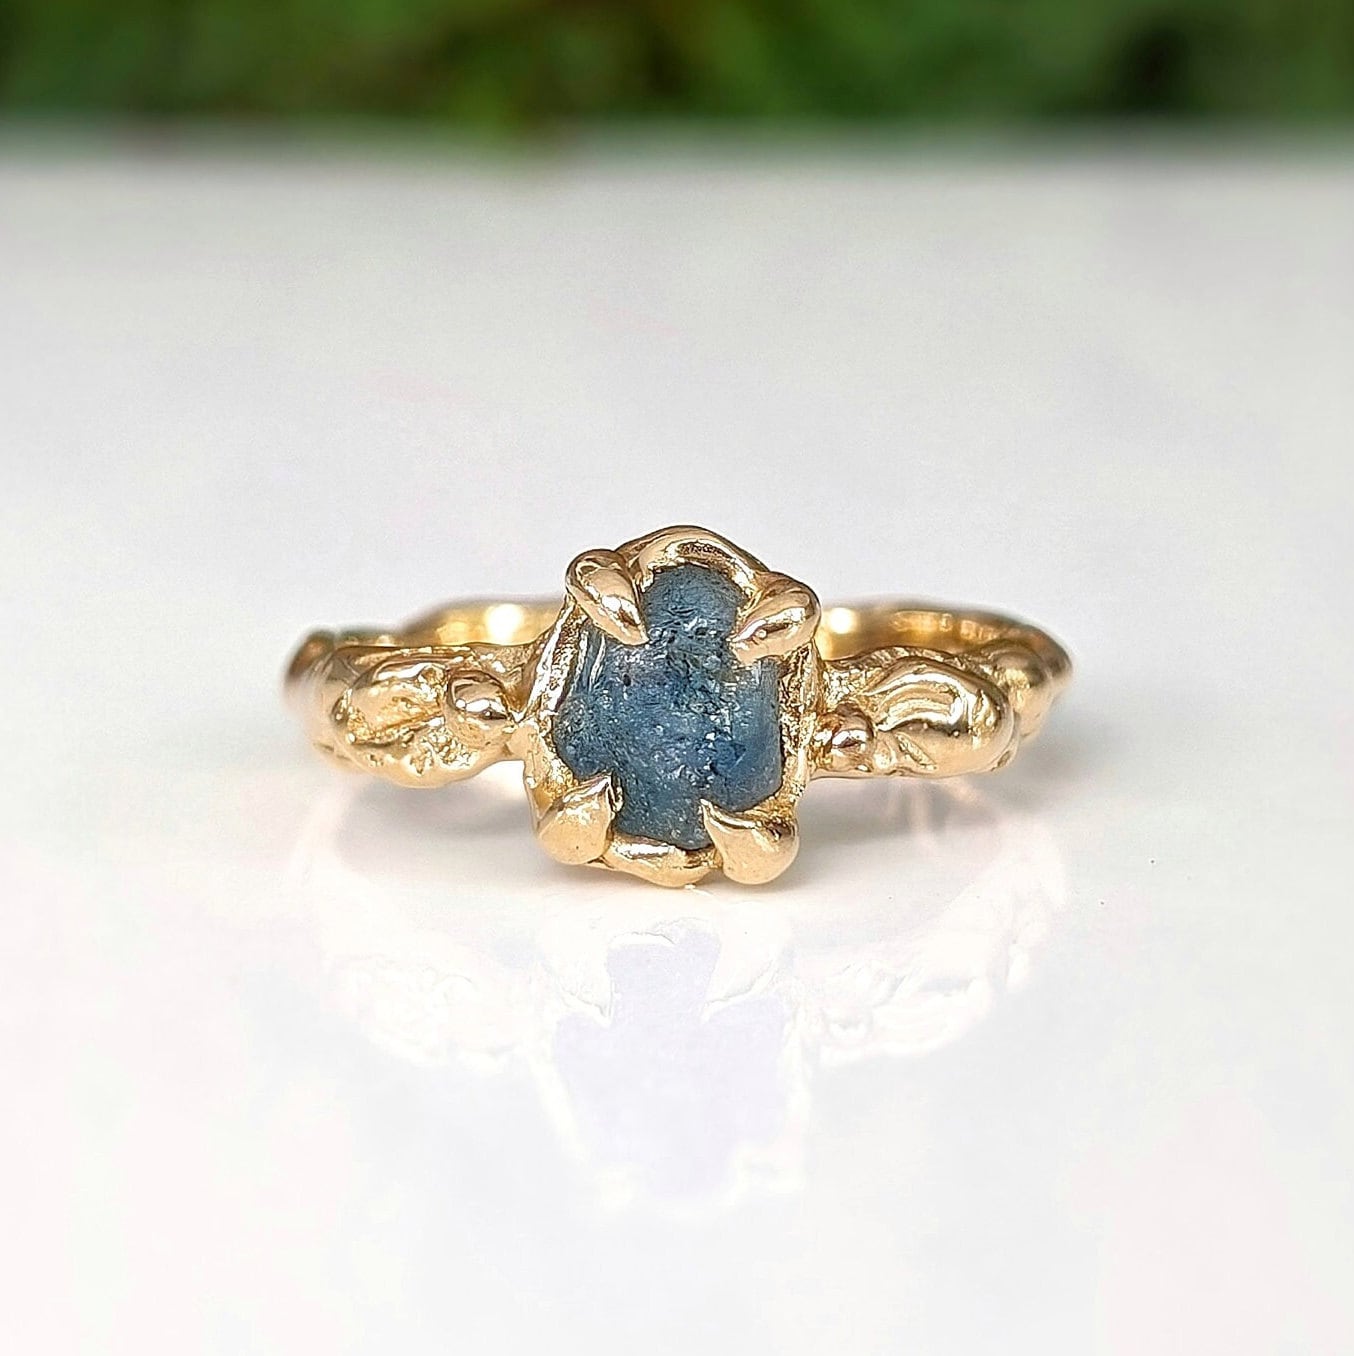 Raw Montana Sapphire set by prongs on a textured Solid 14k Gold band